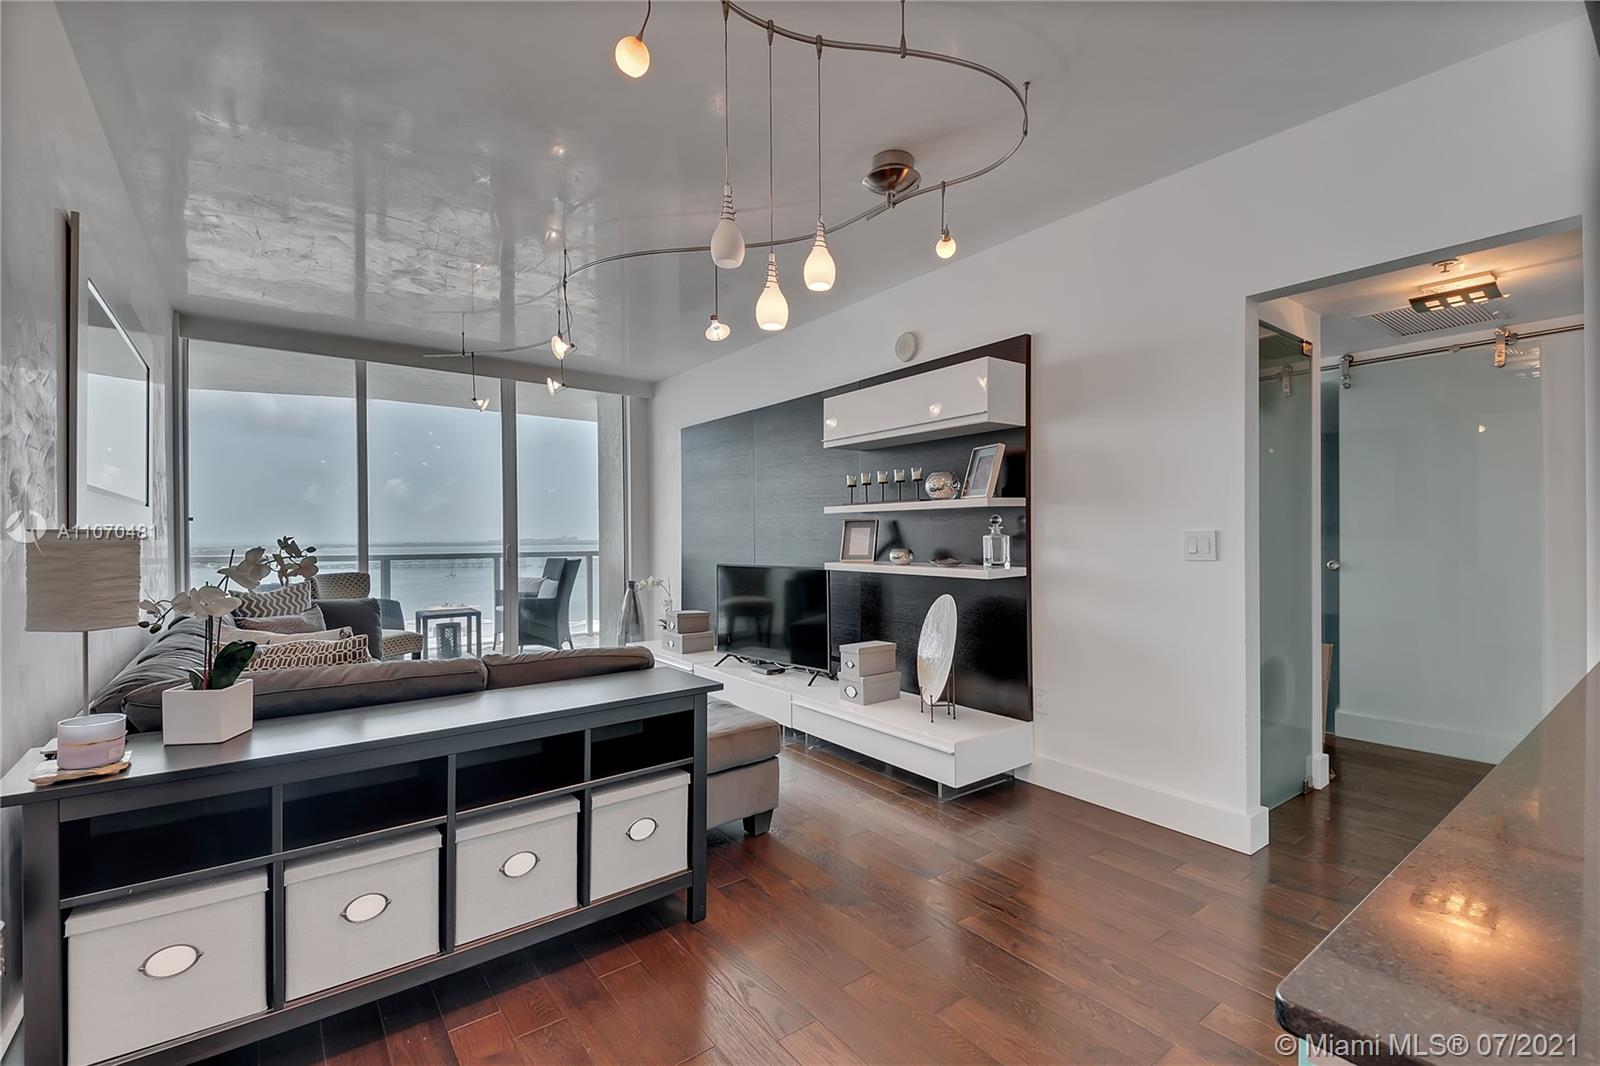 a view of a room with kitchen island stainless steel appliances wooden floor and window